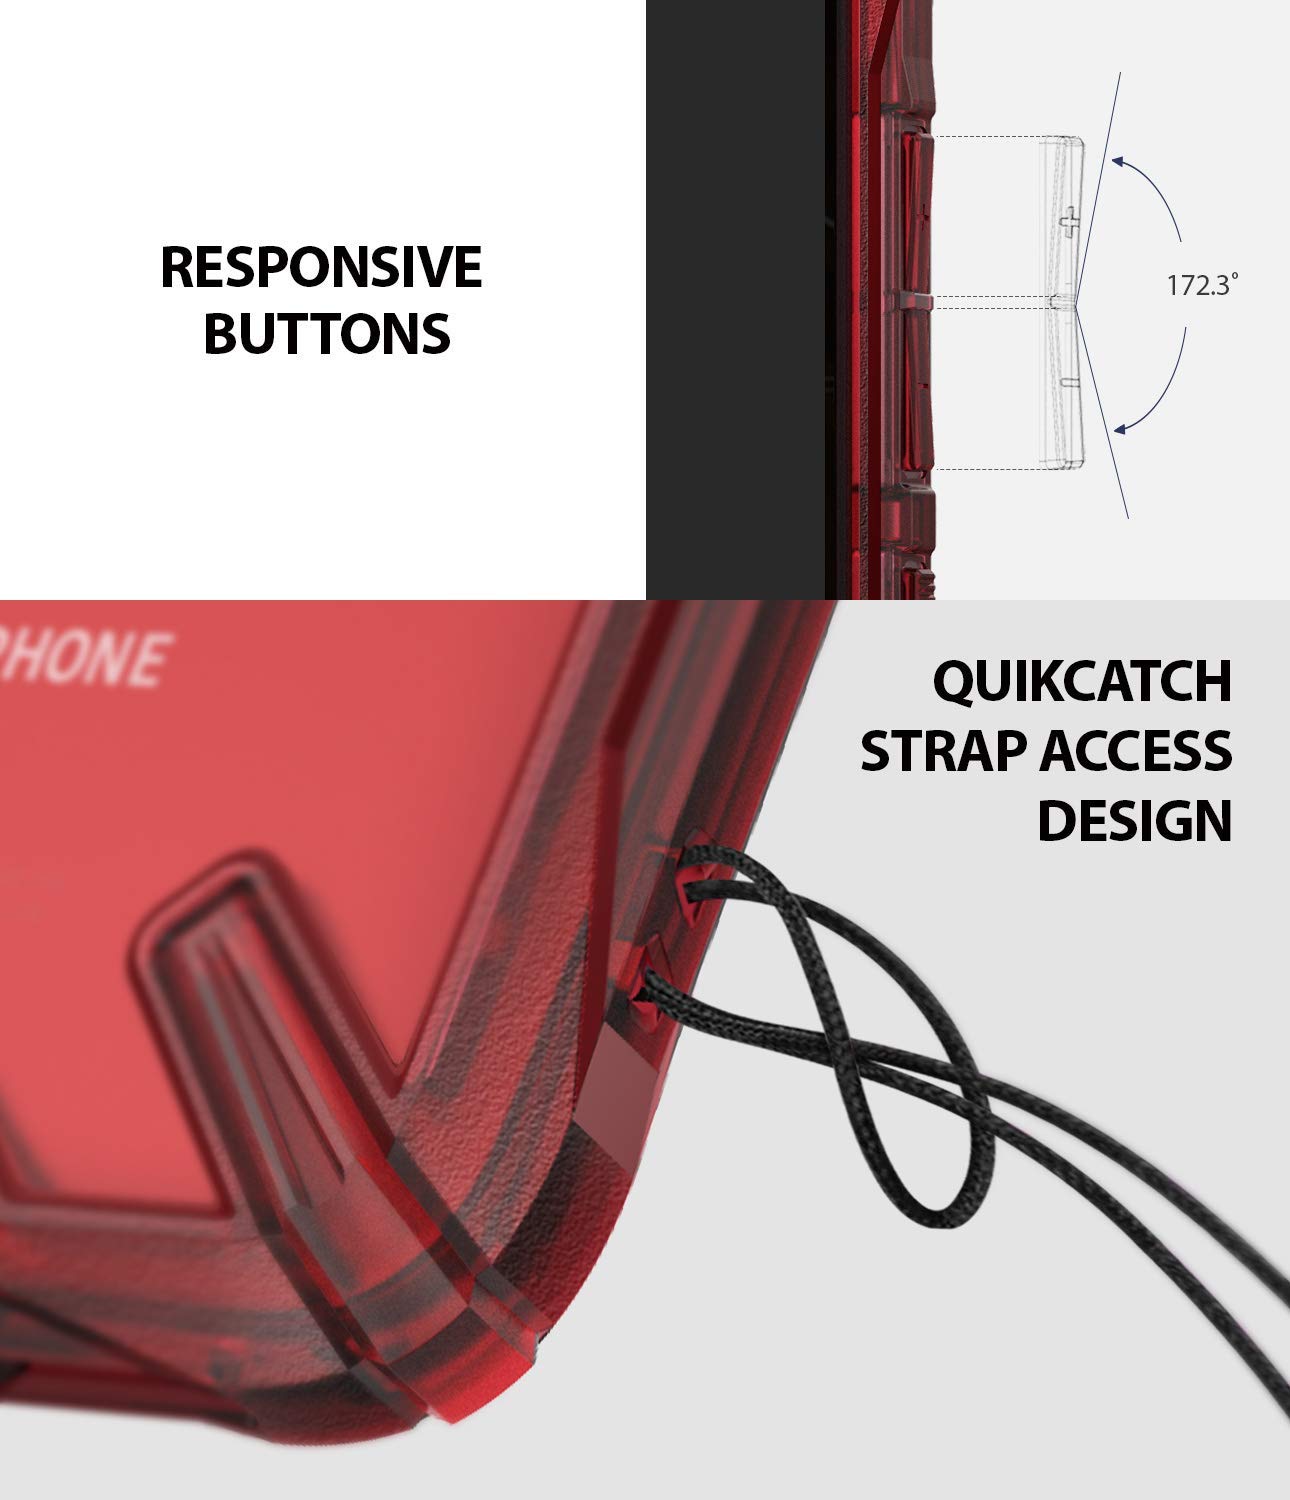 responsive buttons and quikcatch strap access design